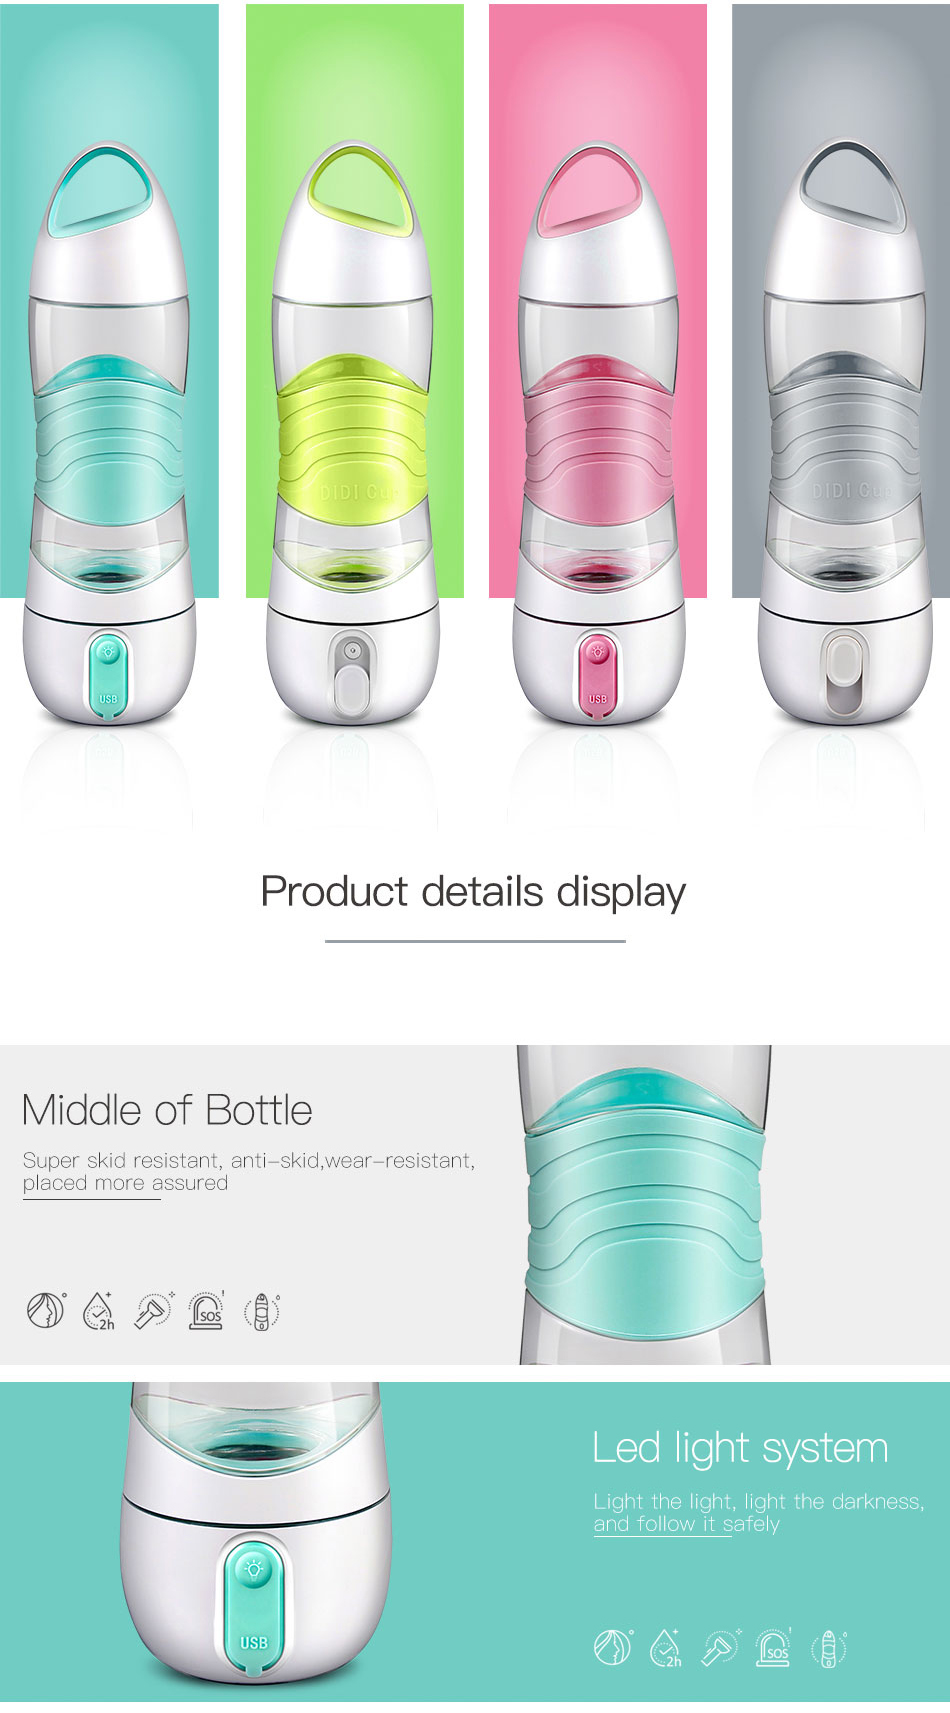 KCASA-DDH8 Portable USB Air Humidifier Spray 400ML Water Bottles Creative Outdoor Drinking Cup Sports Spray Bottle with Light 51